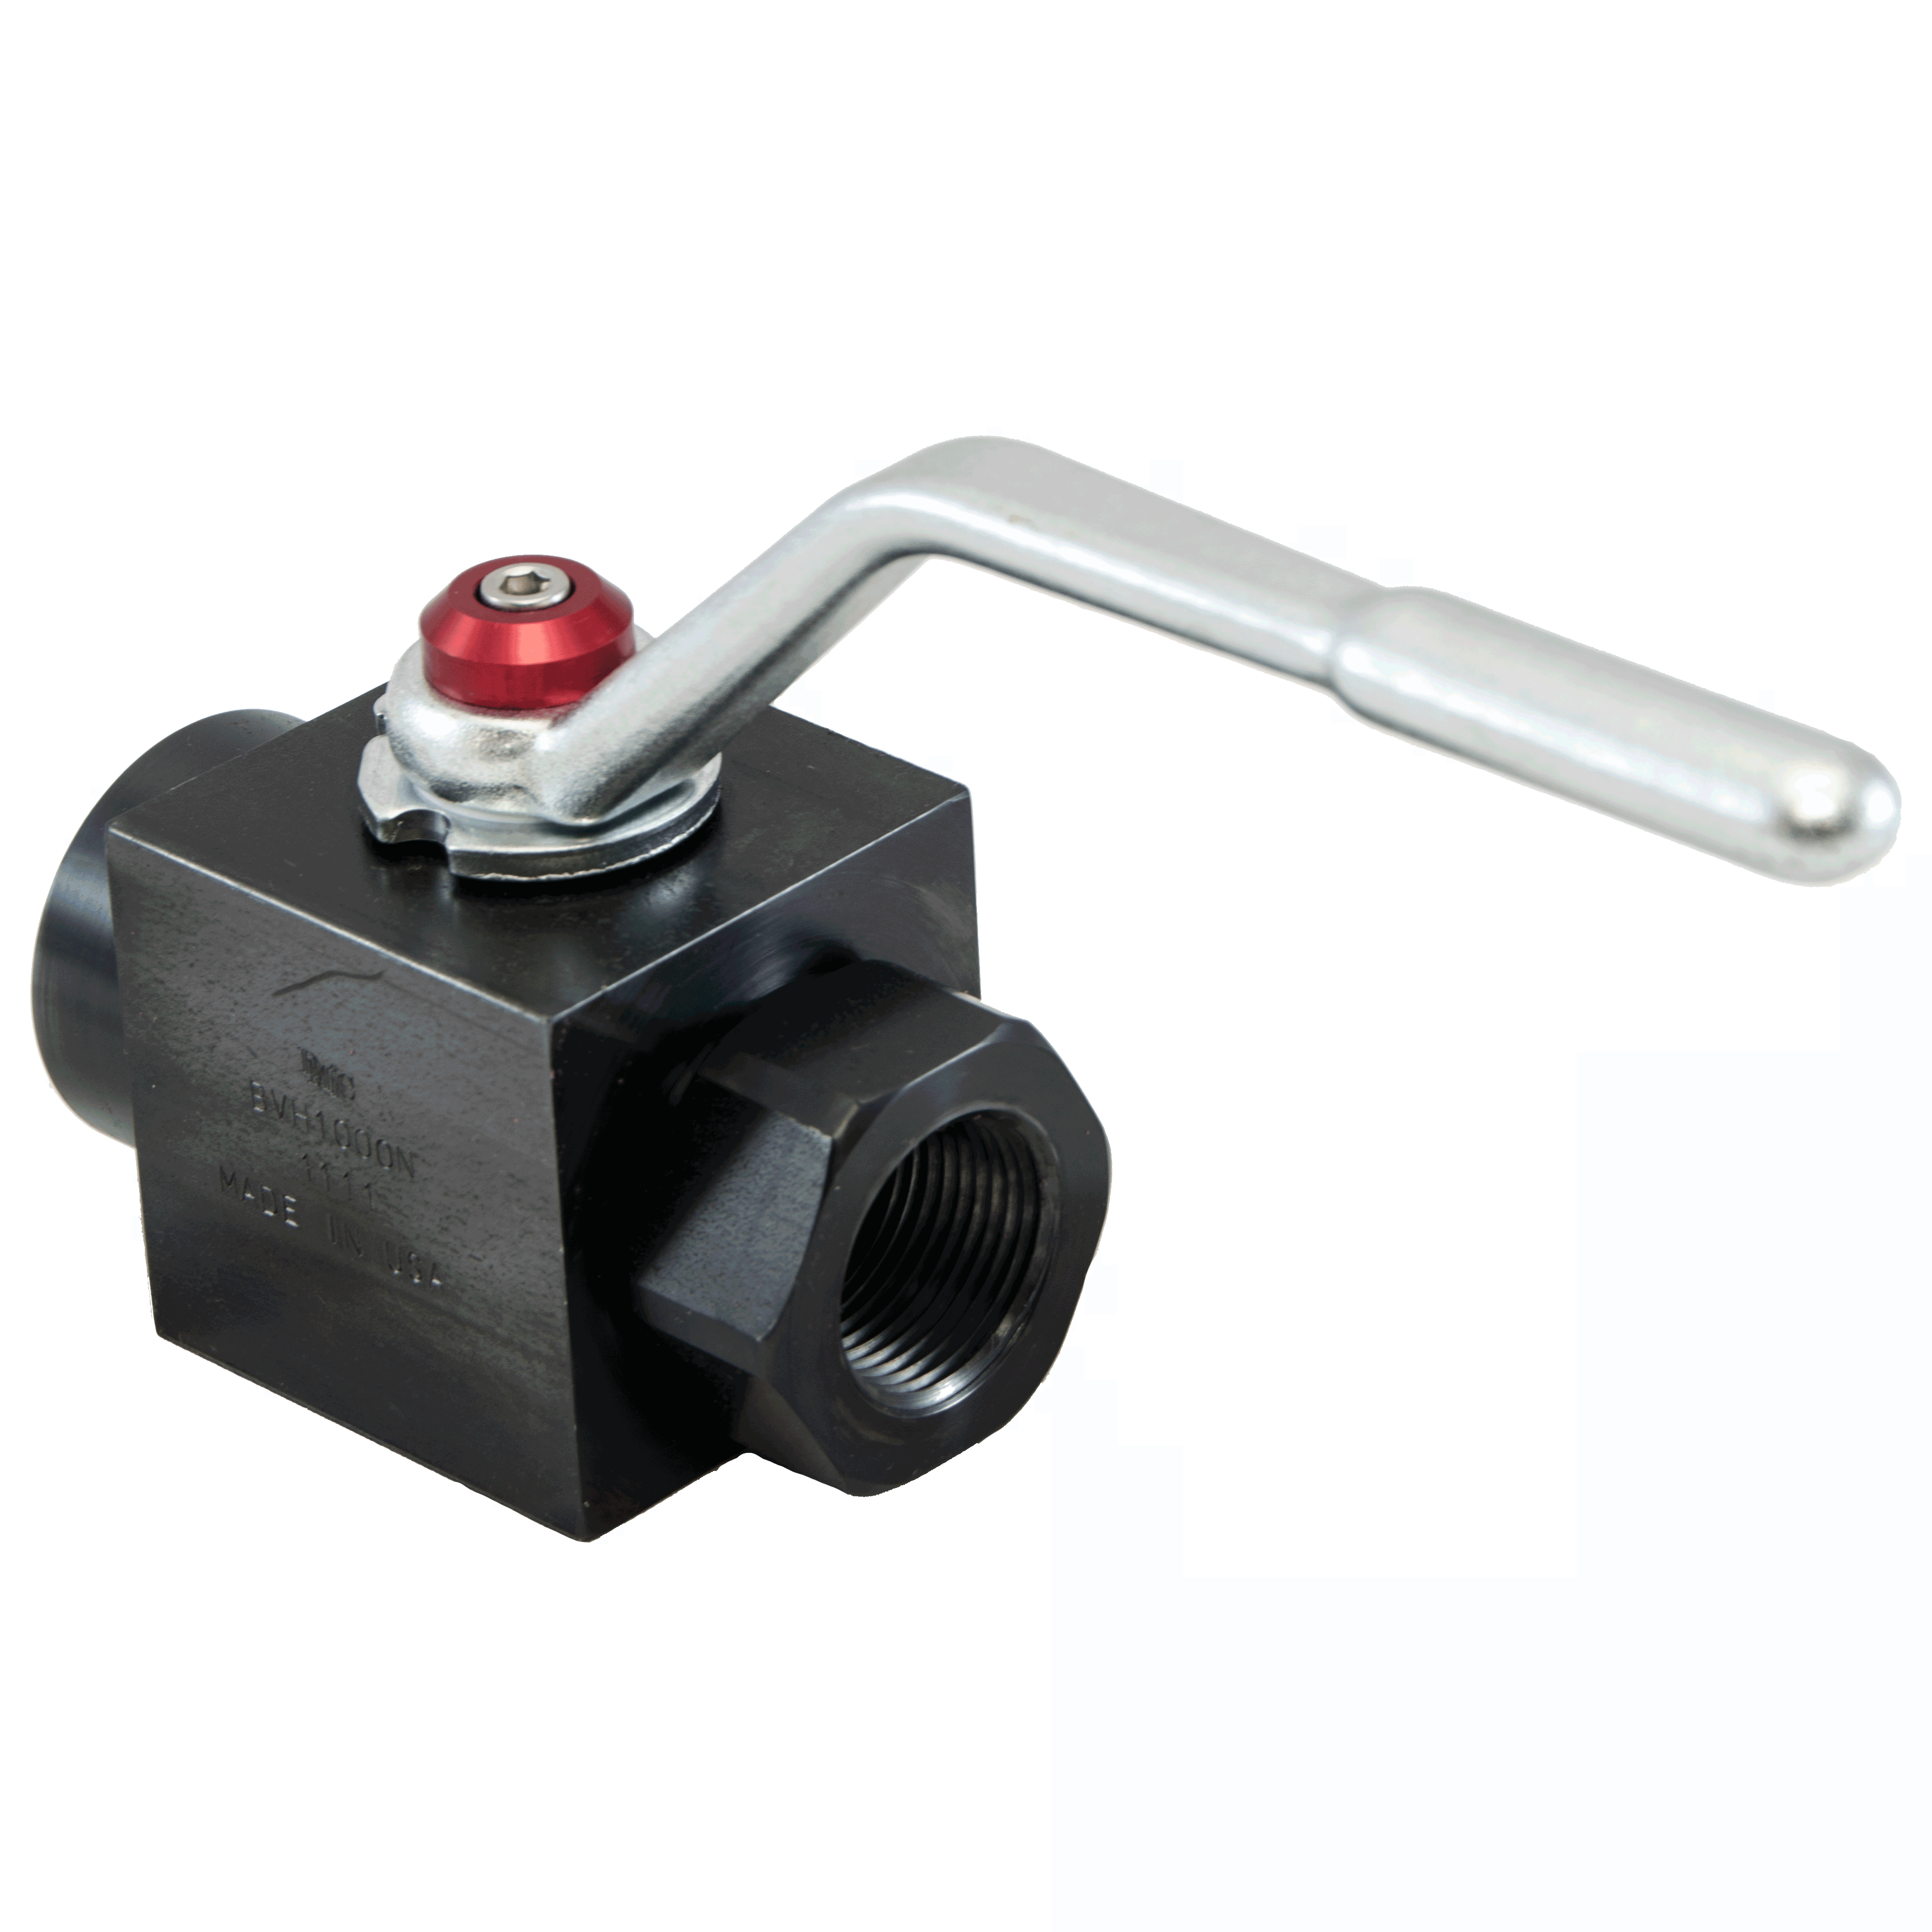 BVH-1000S-1111 : DMIC Square Body Ball Valve, #16 SAE (1), Carbon Steel, 6000psi, Two-Way